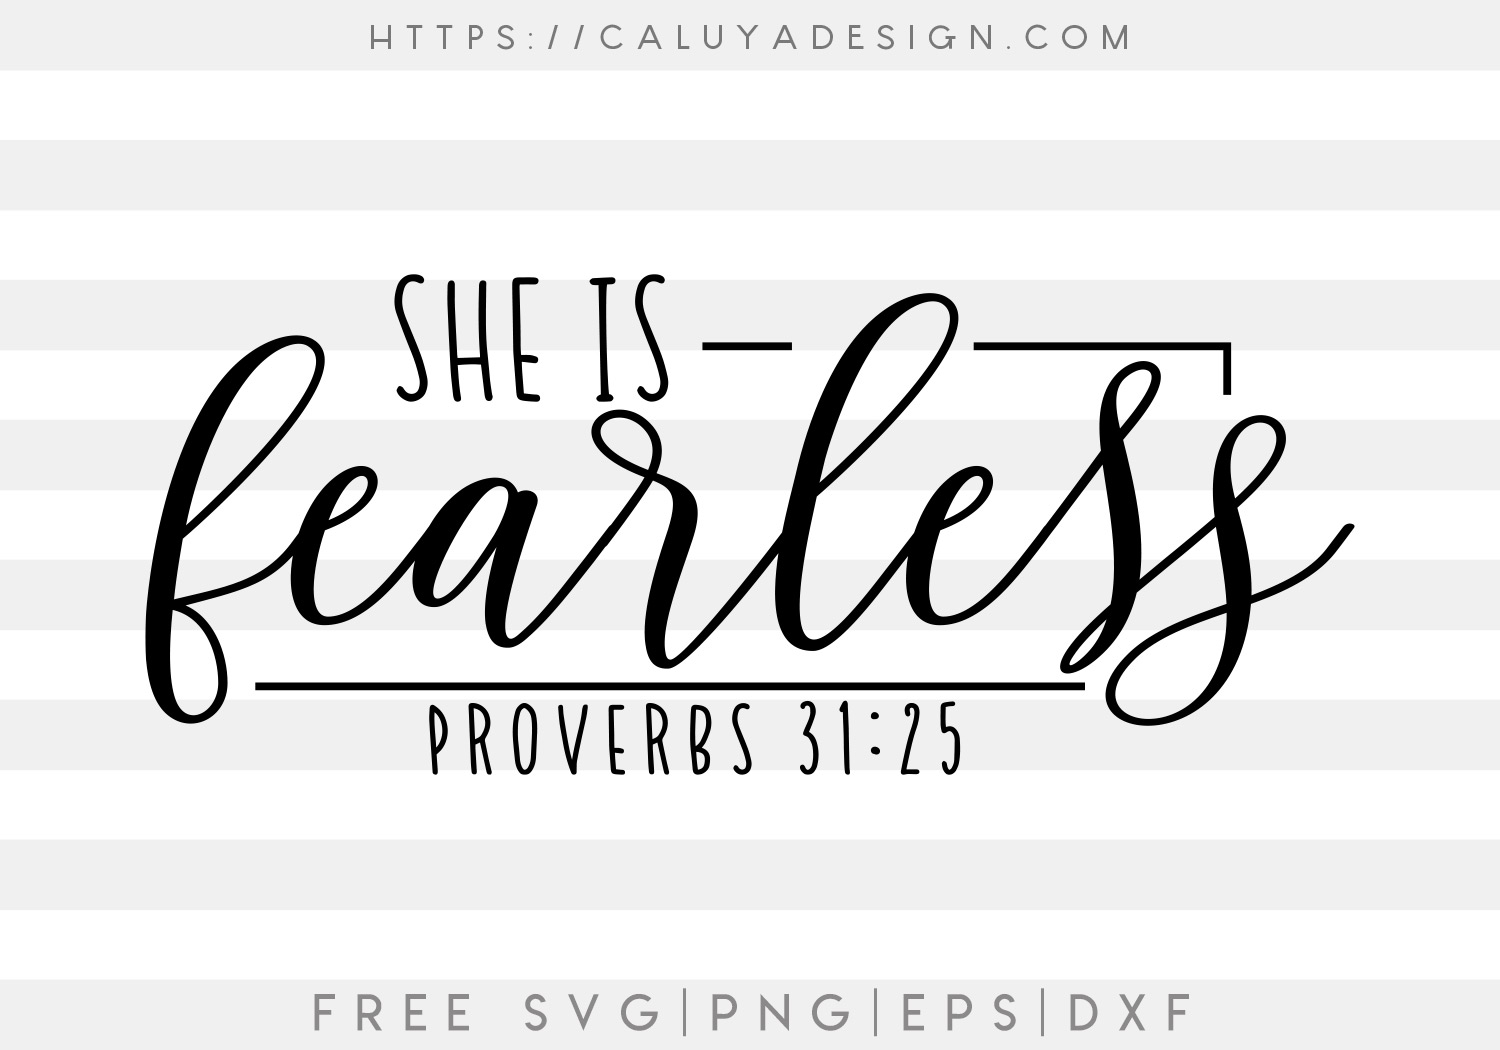 She Is Fearless SVG, PNG, EPS & DXF